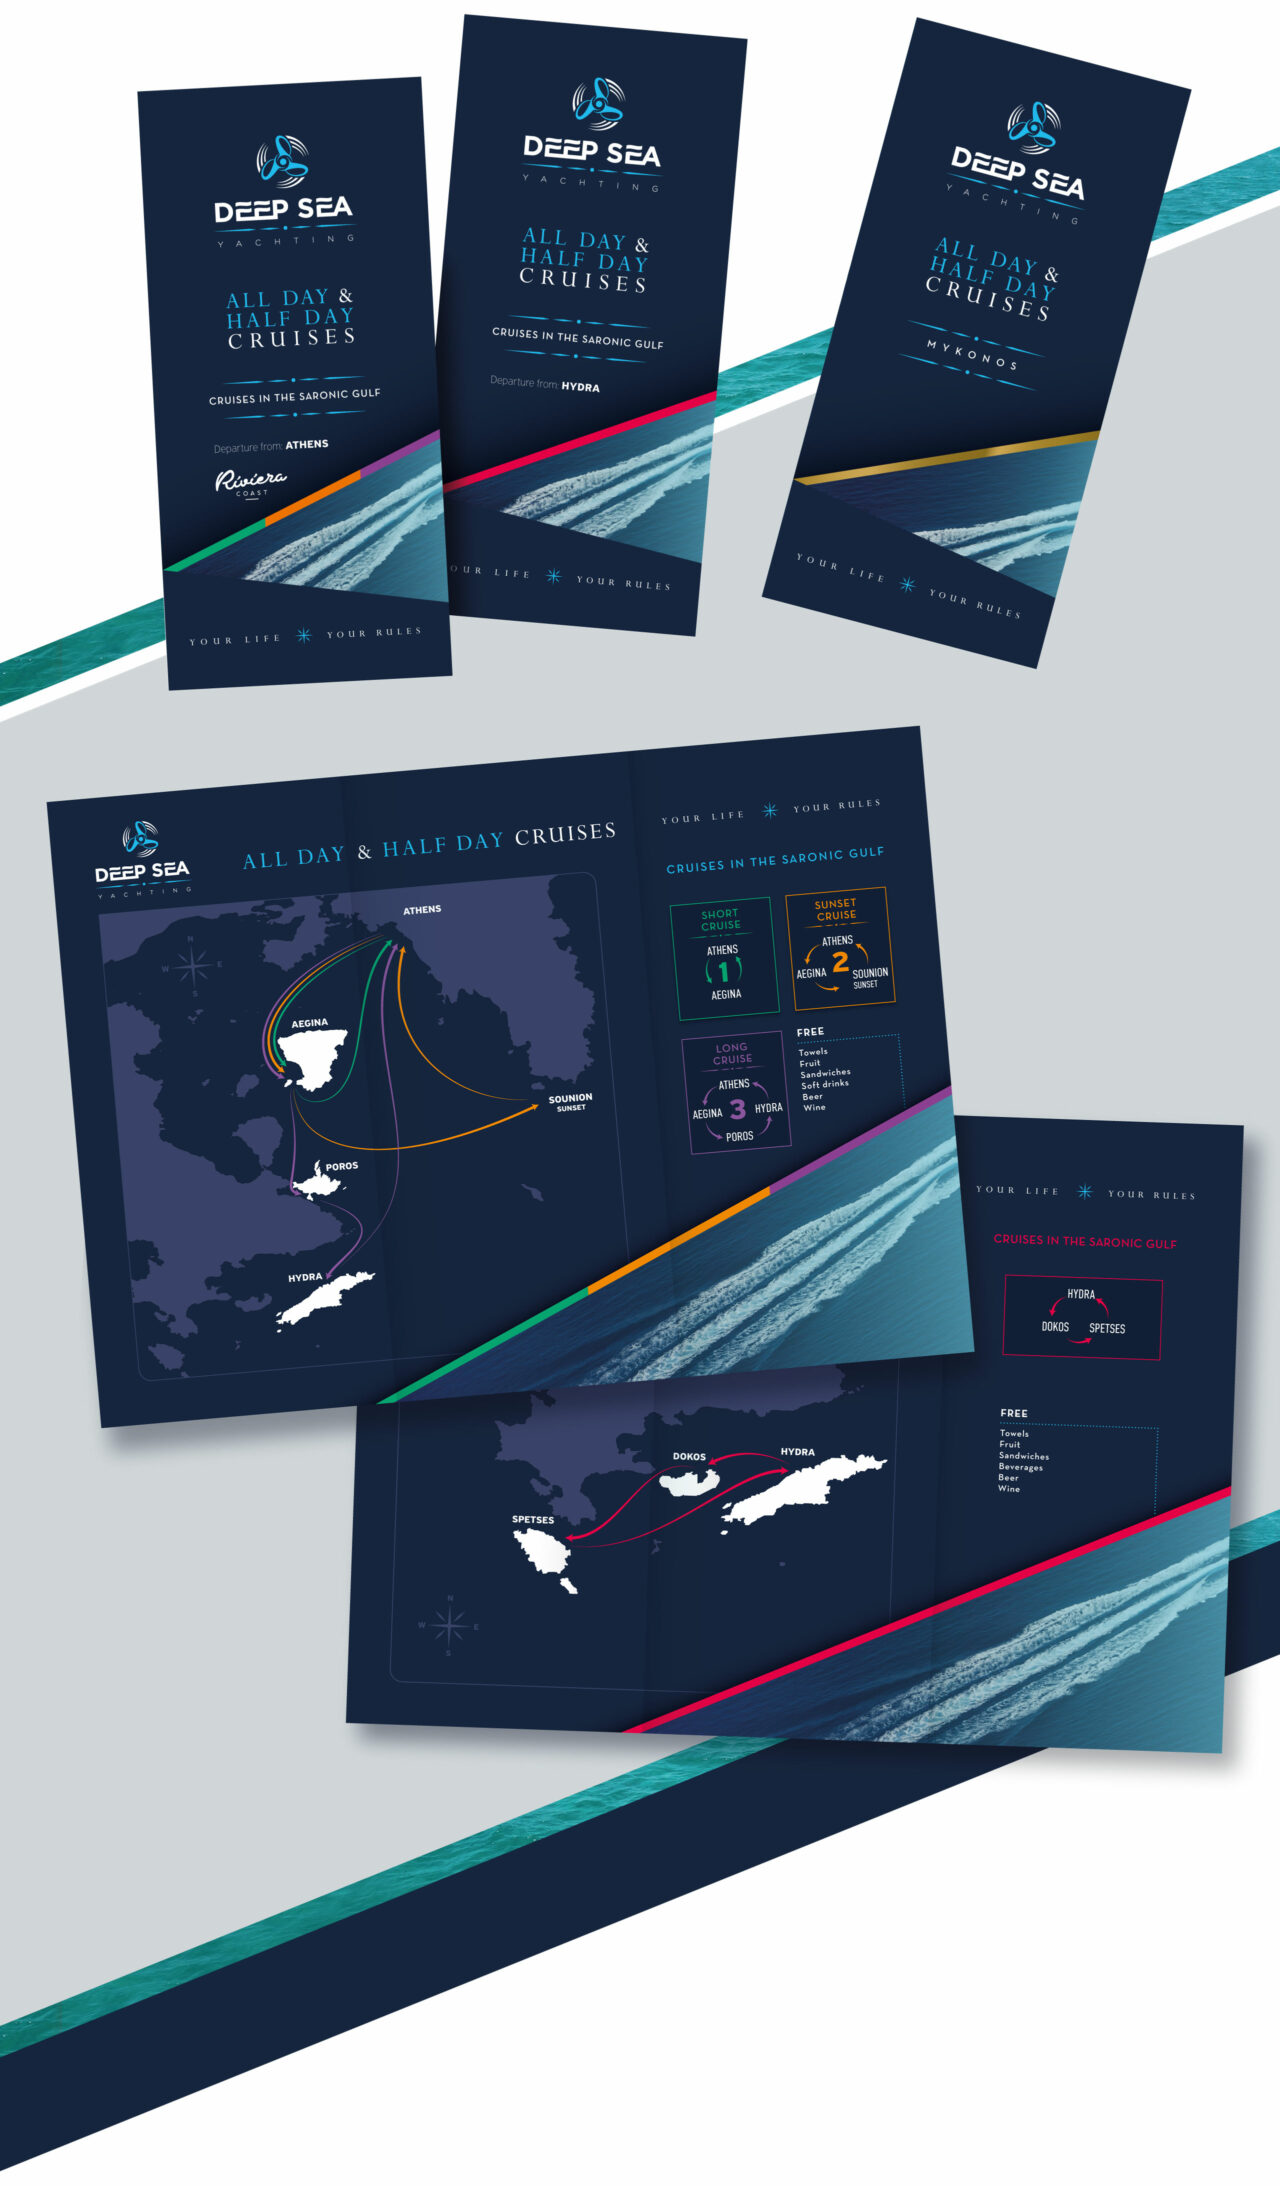 Corporate advertising brochures and custom map design for Deep Sea yachting